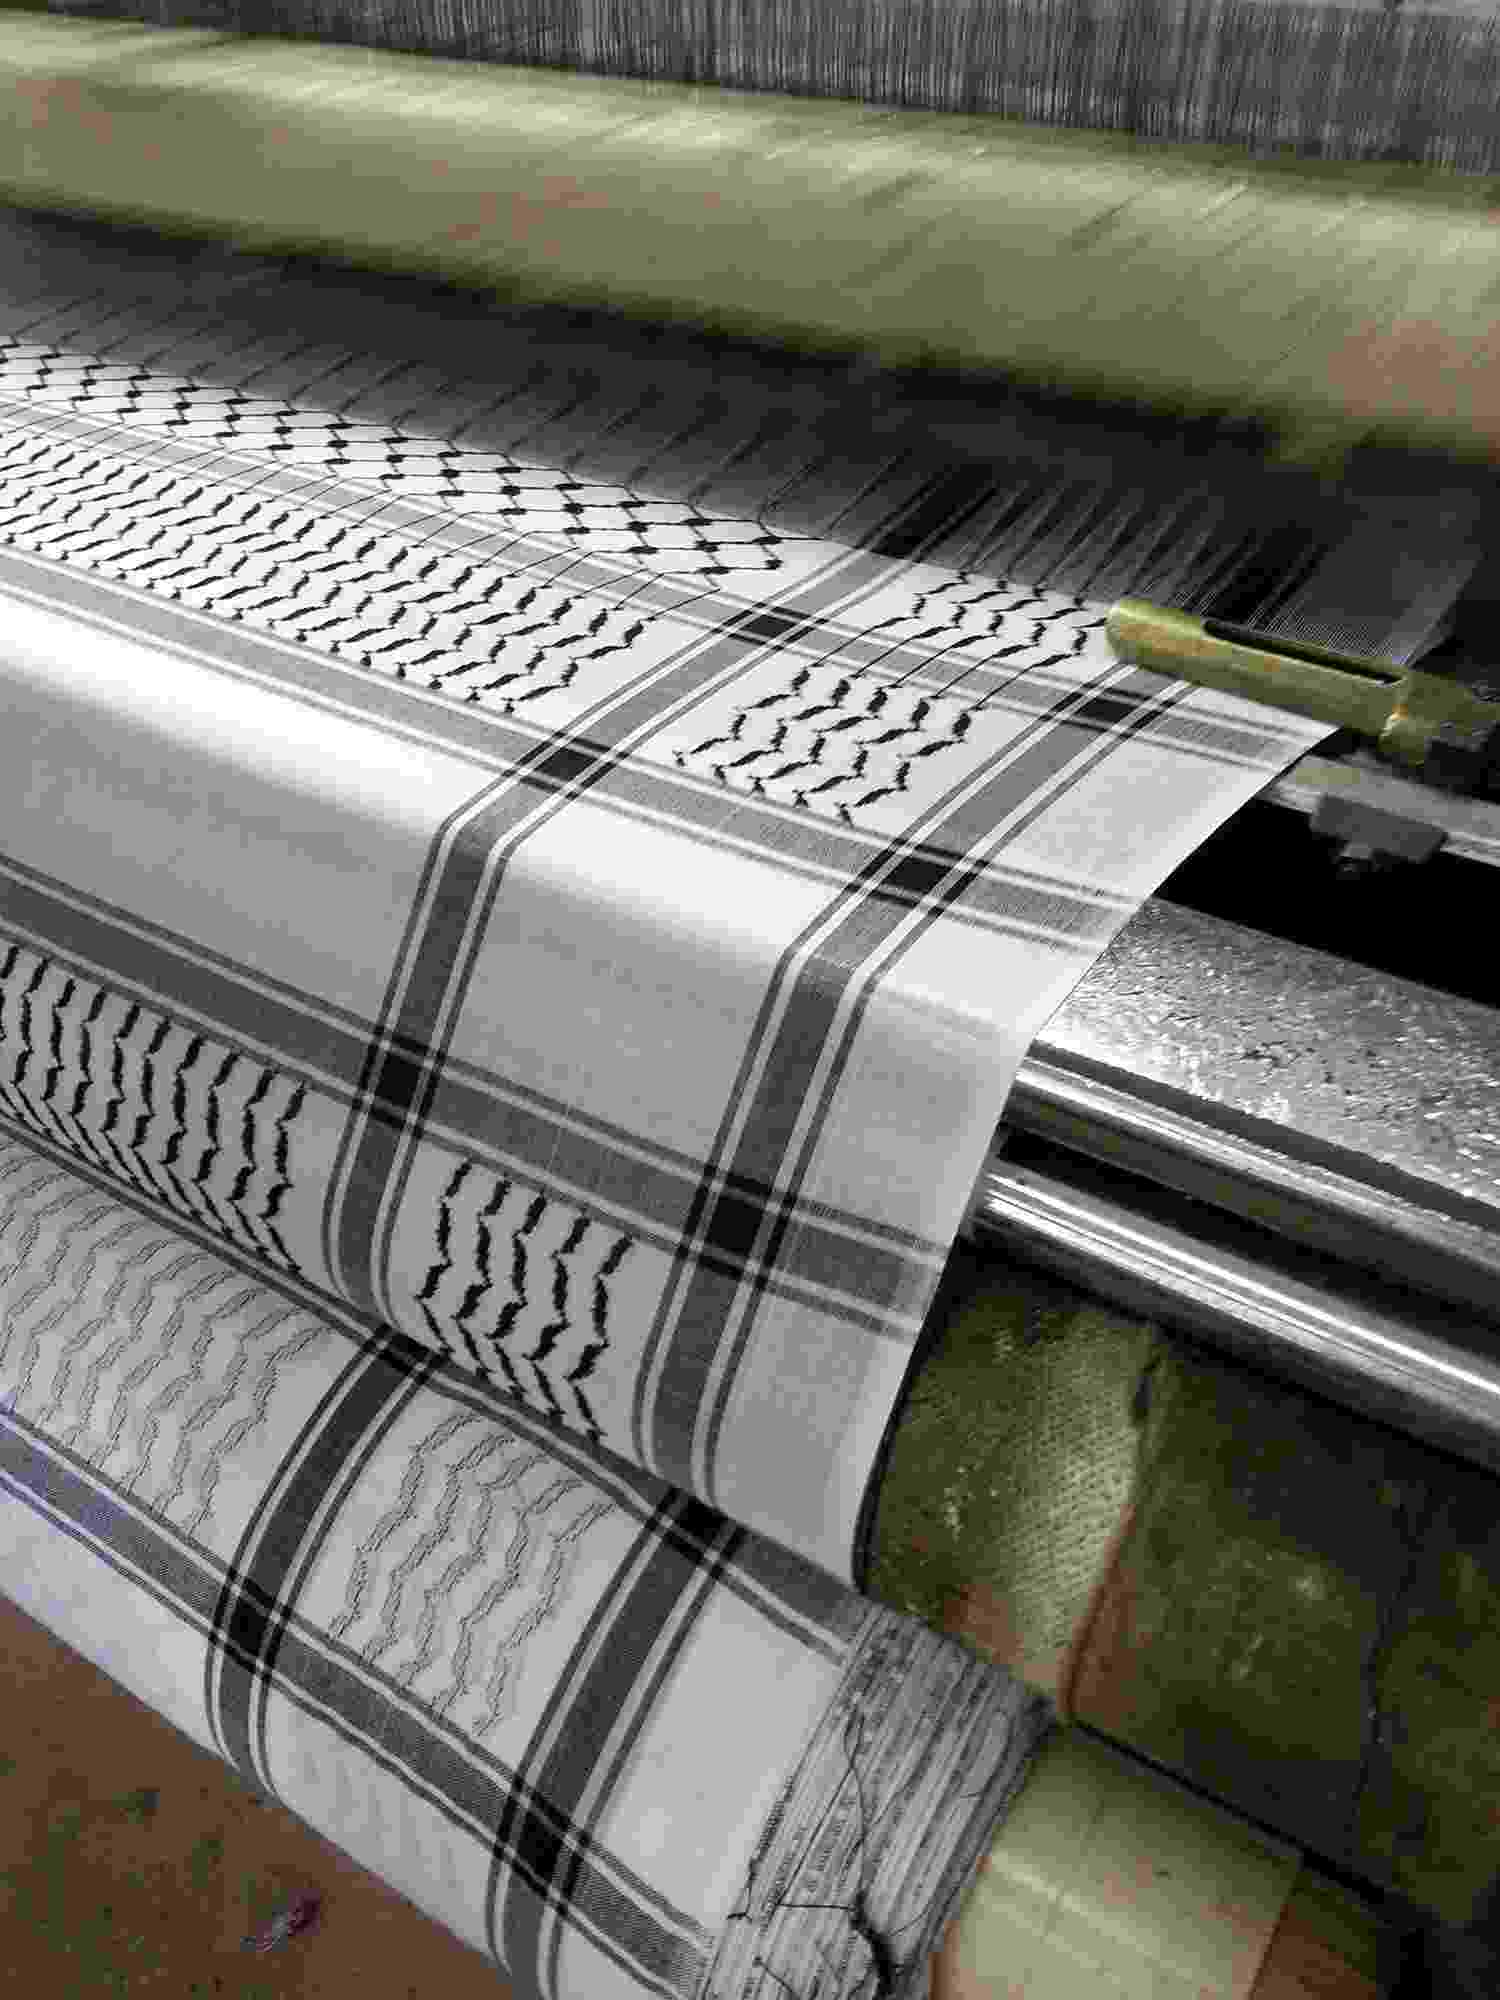 A close up of the rollers of a weaving machine creating traditional black and white ‘Keffiyeh’ scarves